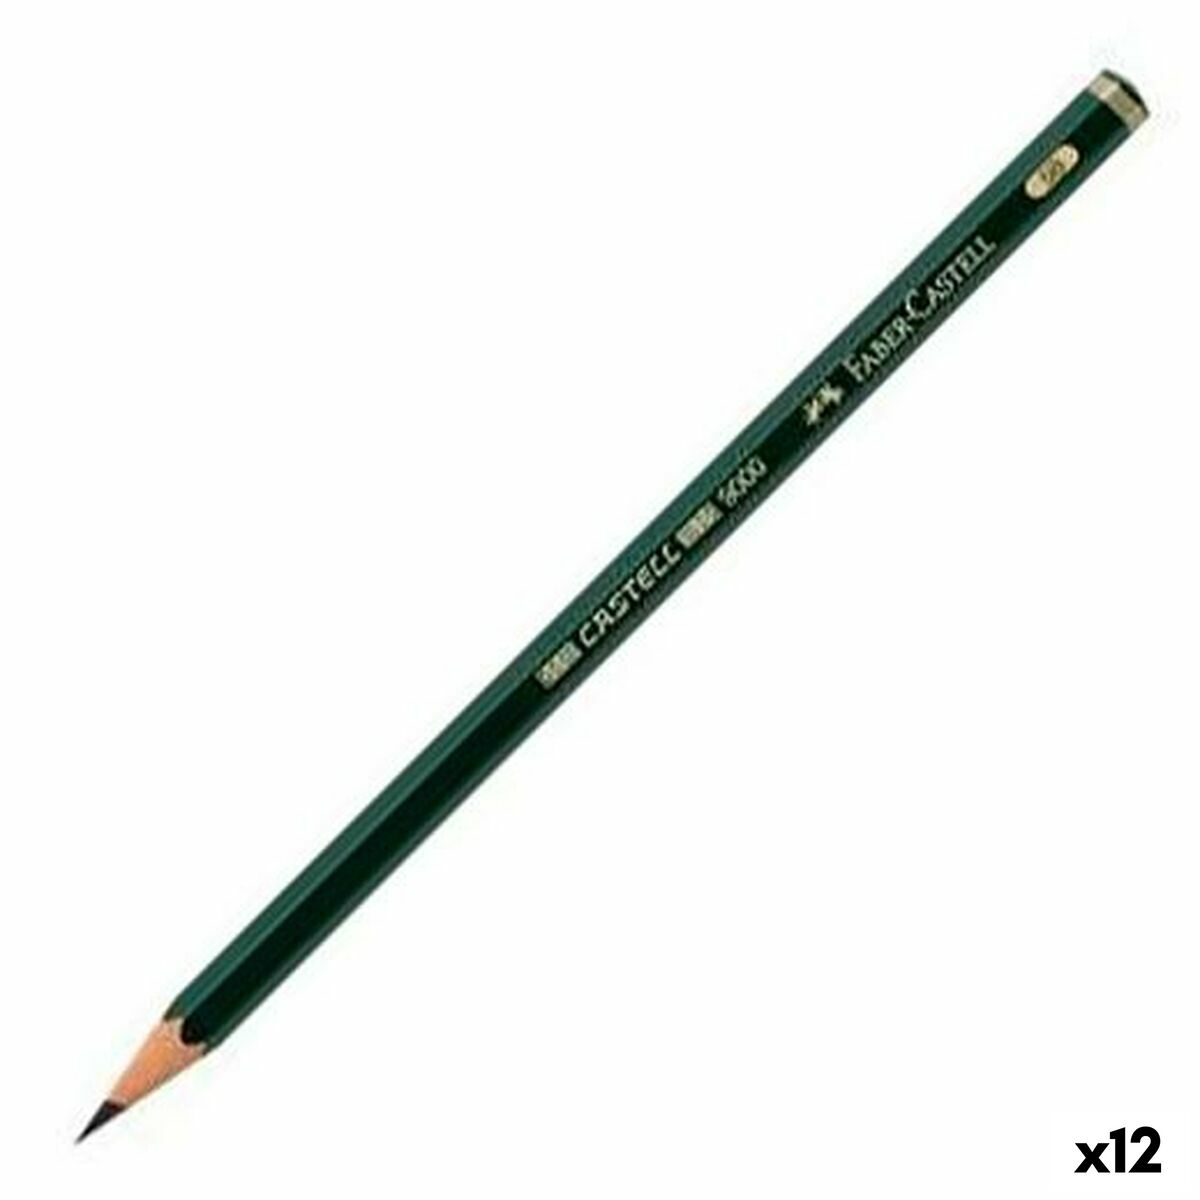 Pencil Faber-Castell 9000 Ecological 5B (12 Units)